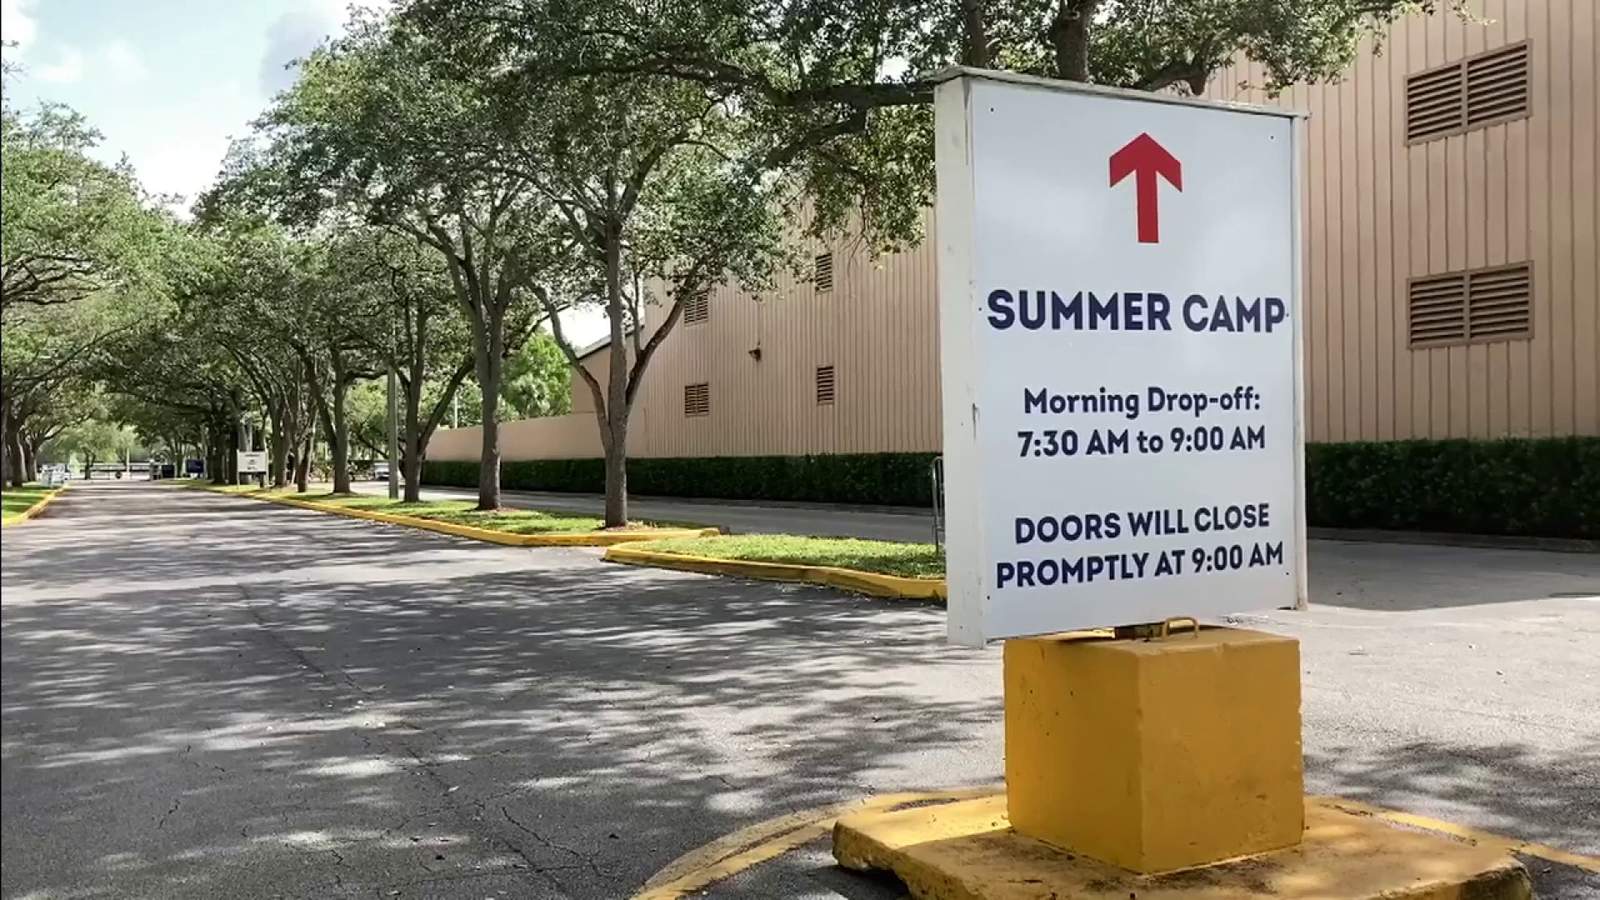 MiamiDade summer camp closed after employee tests positive for COVID19